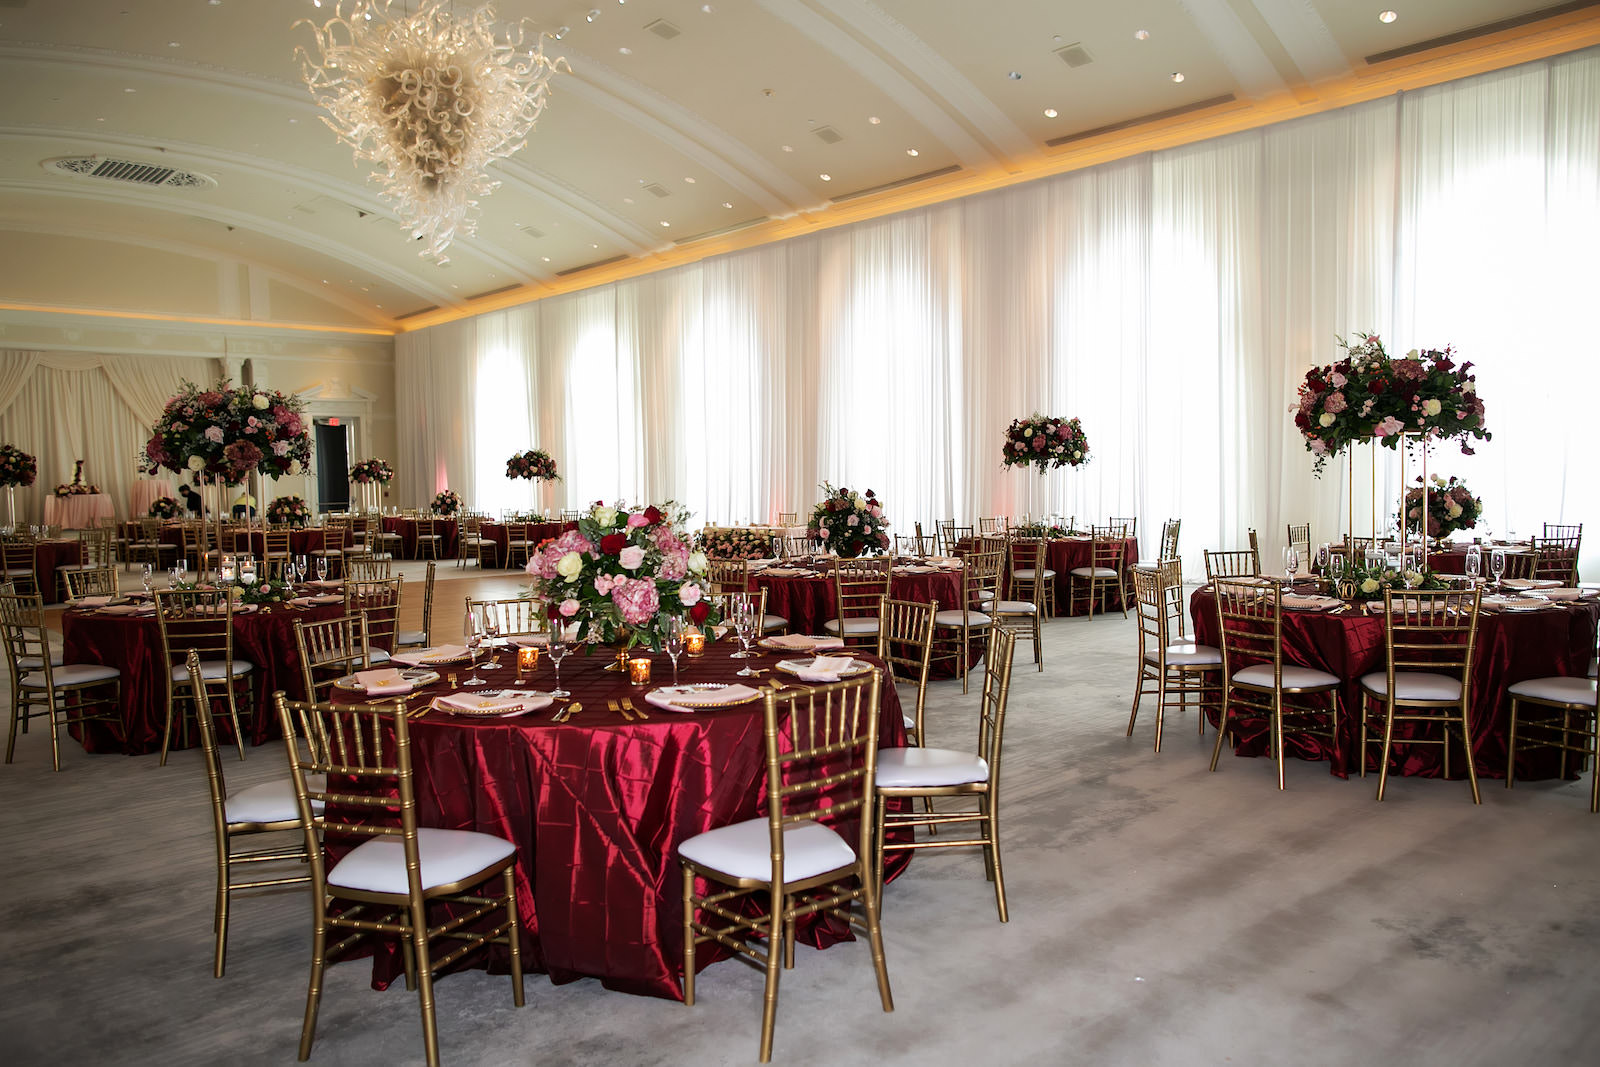 Elegant Garden Burgundy Ballroom Wedding Reception Decor, Red Silk Table Linen, Gold Chiavari Chairs, Gold Stand with Lush Red, Pink and White Roses and Greenery Floral Centerpiece | Tampa Bay Wedding Photographer Limelight Photography | Wedding Florist Lemon Drops | Wedding Planner Breezin Weddings | Wedding Rentals Outside the Box Event Rentals | Vinoy Wedding